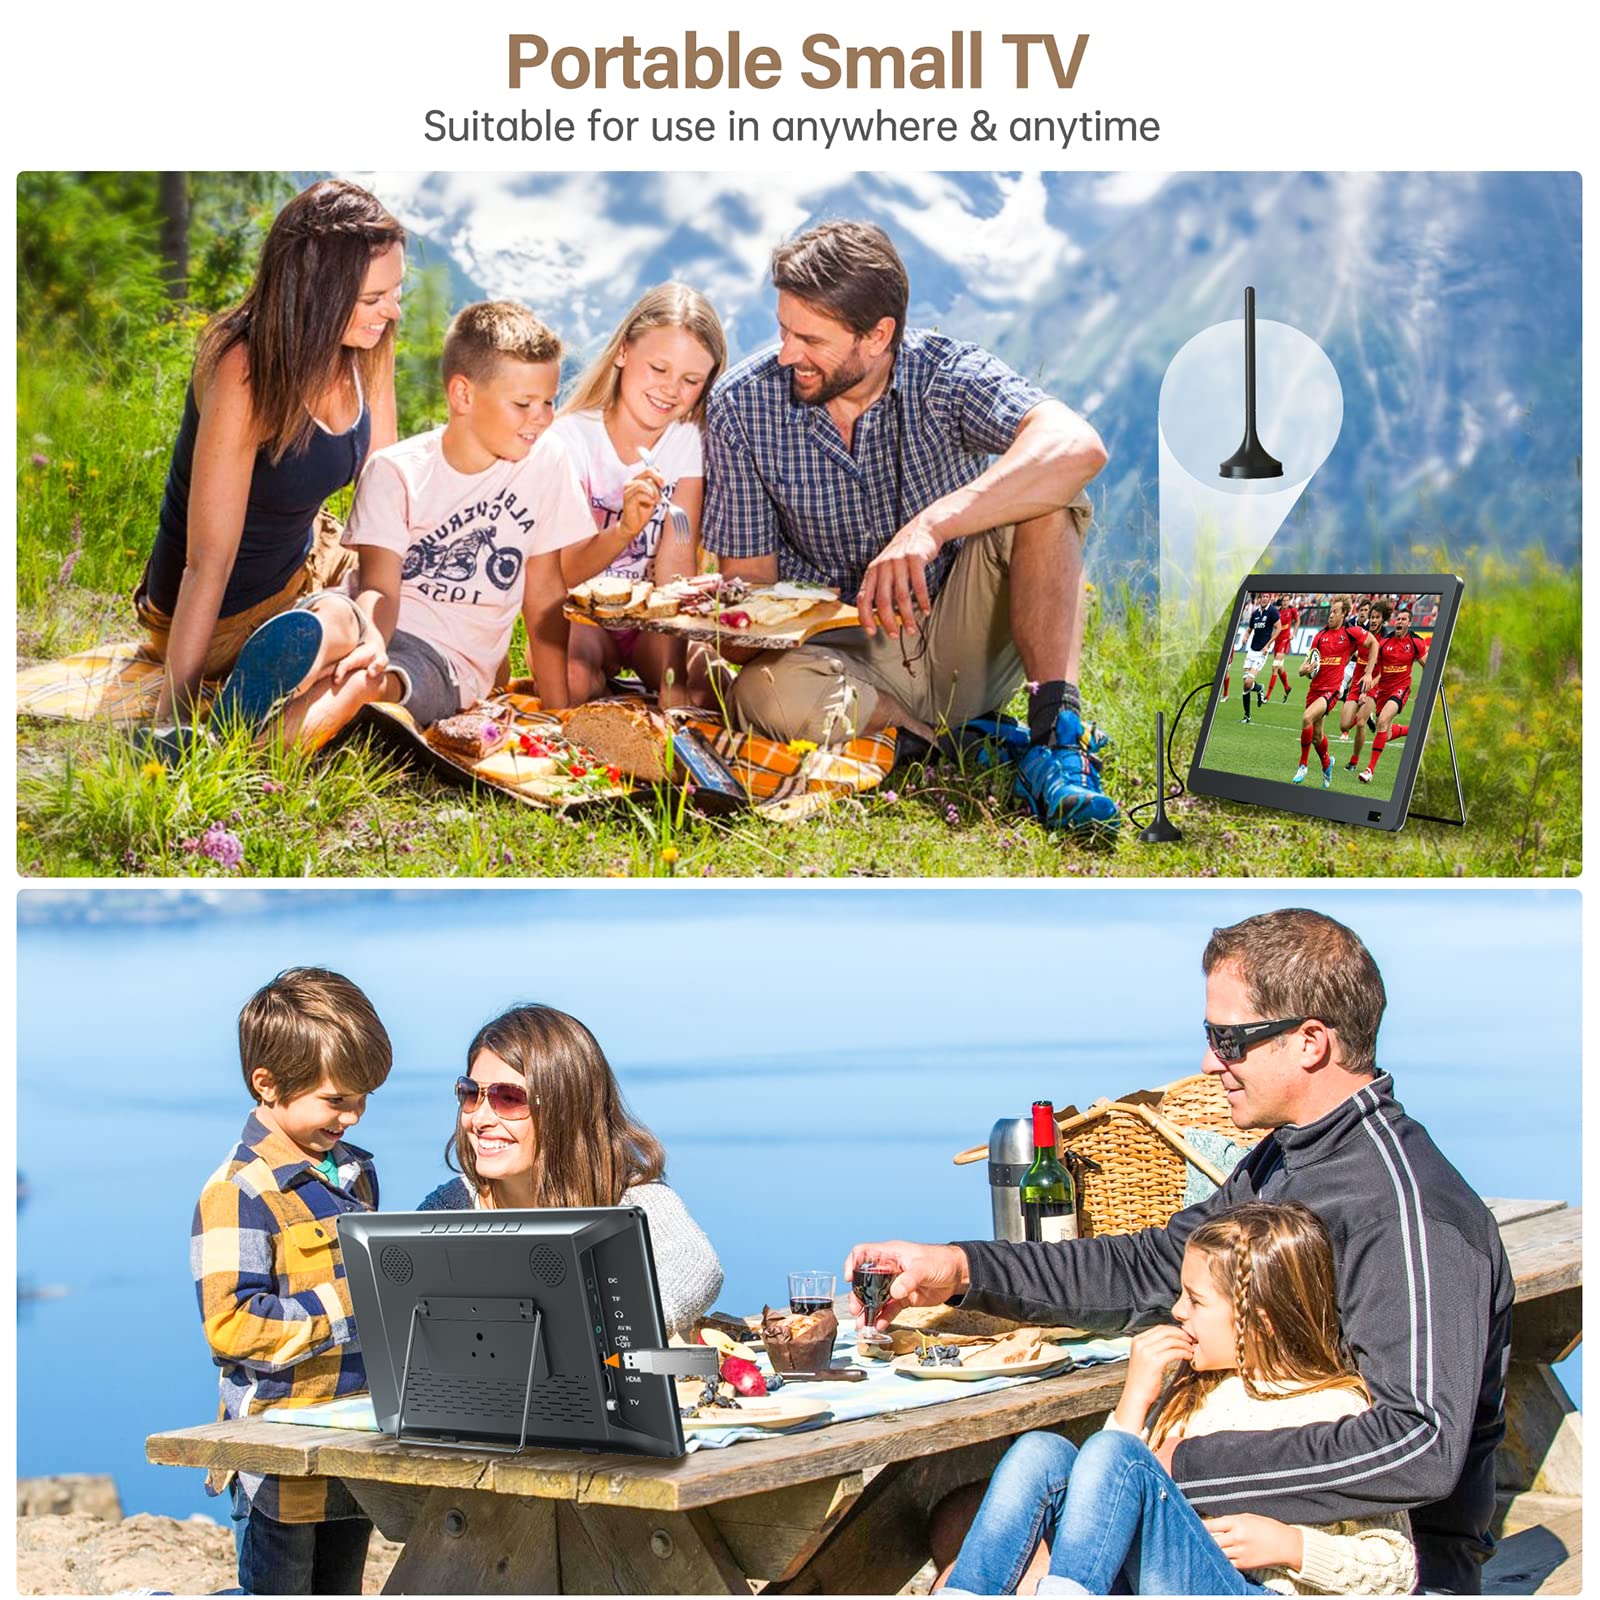 14 inch Portable TV with Antenna, DESOBRY Portable Small TV with ATSC Tuner, Rechargeable Battery Operated Mini TV LCD Monitor 1080P,Built-in TV Stand,HDMI Input,USB,AV In,Supports Camping,Kitchen,Car